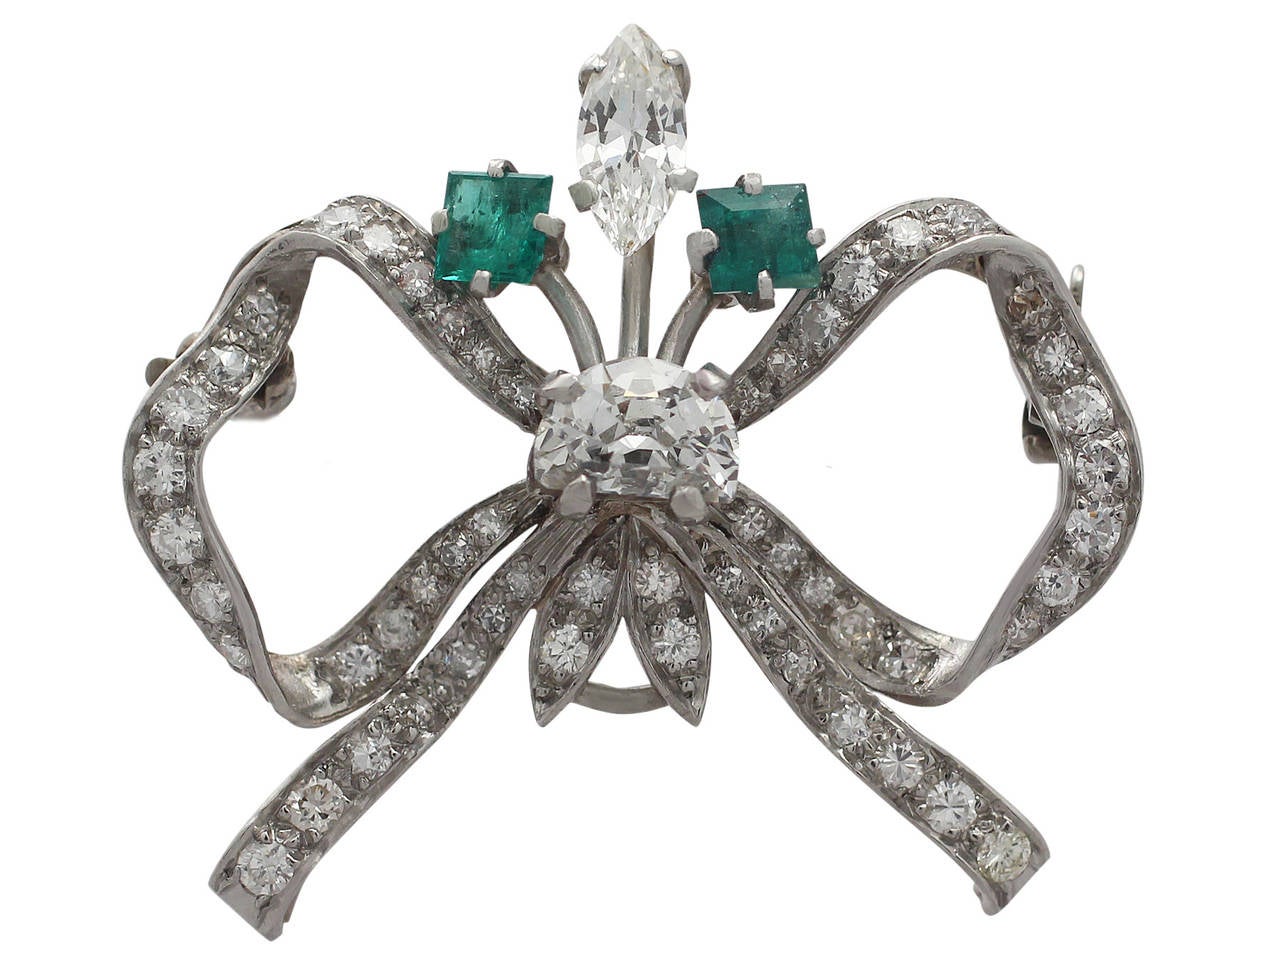 A fine and impressive 2.42 carat diamond and 0.52 carat, 18 karat white gold brooch in the form of a tied ribbon; part of our vintage jewelry and estate jewelry collections

This fine and impressive vintage diamond and emerald 1950 brooch has been